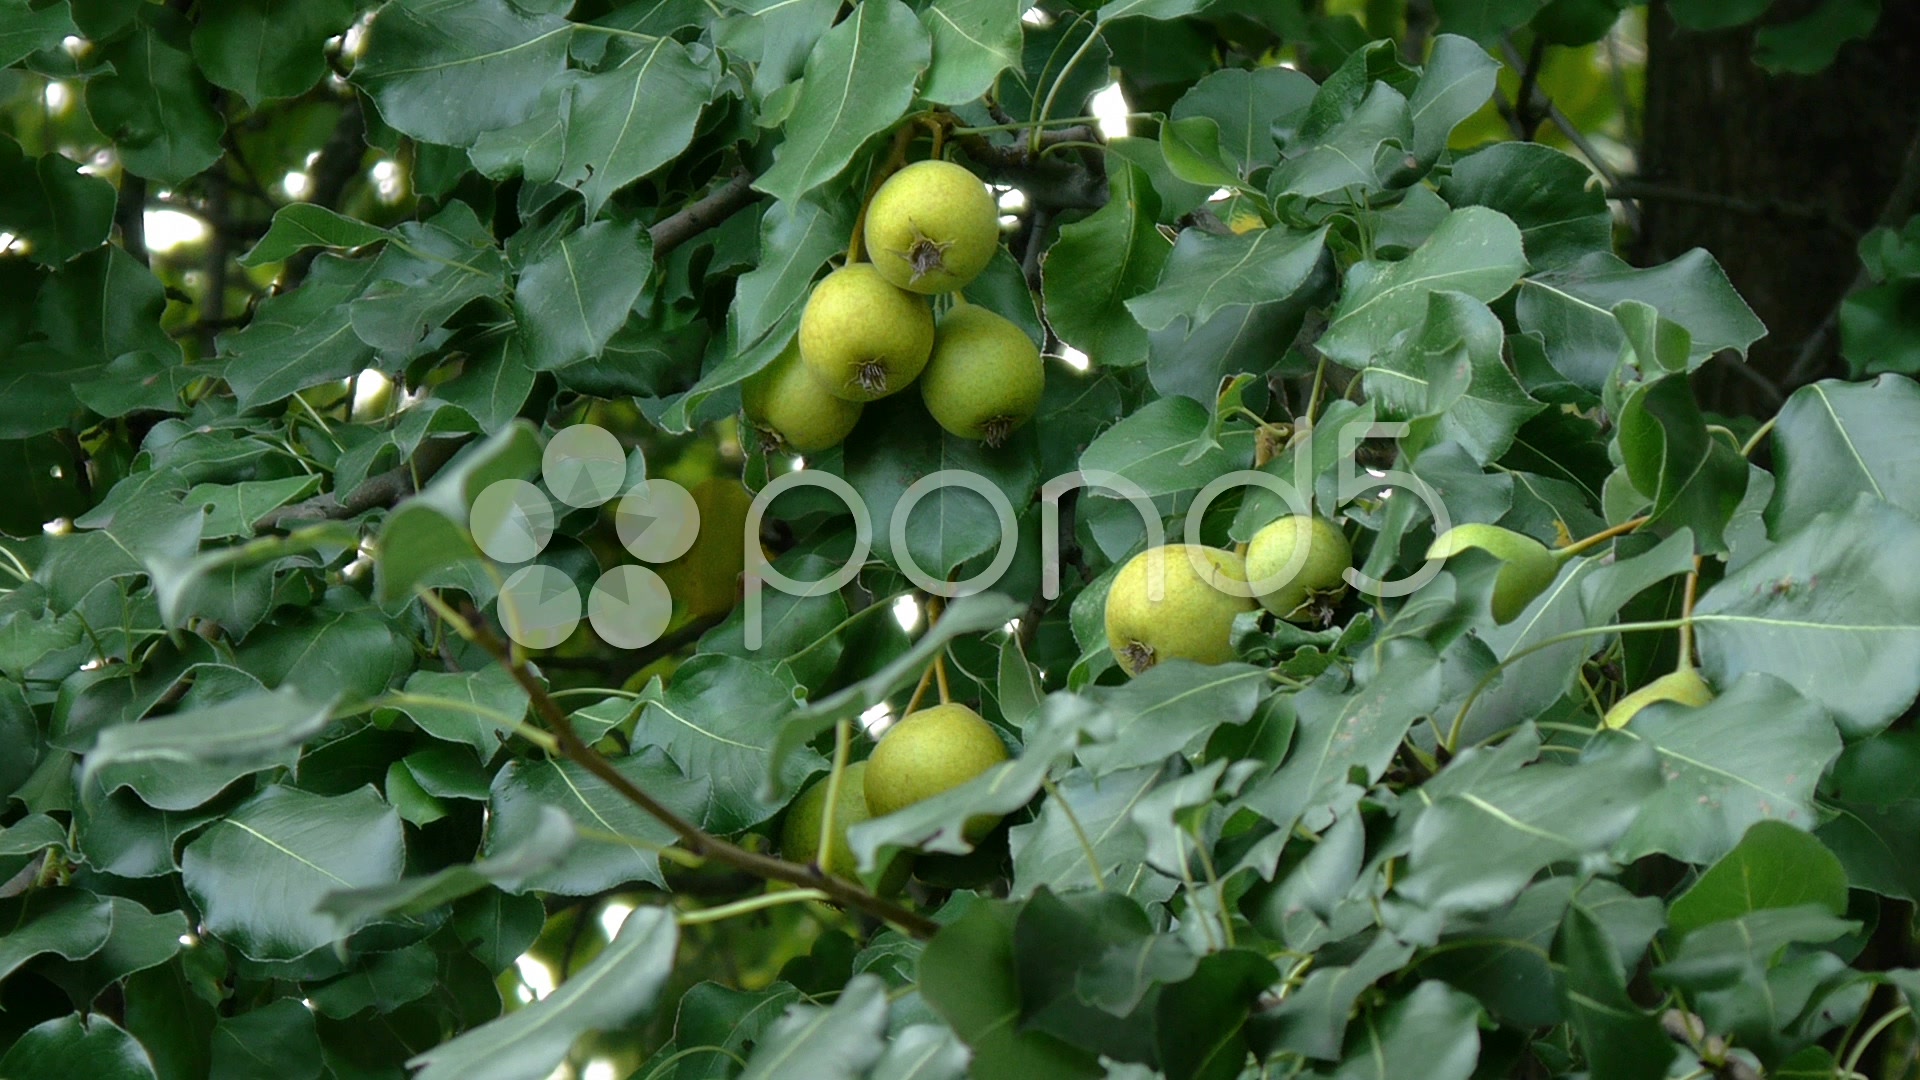 Pear tree, fruits of the branch ~ Stock Footage #36169588